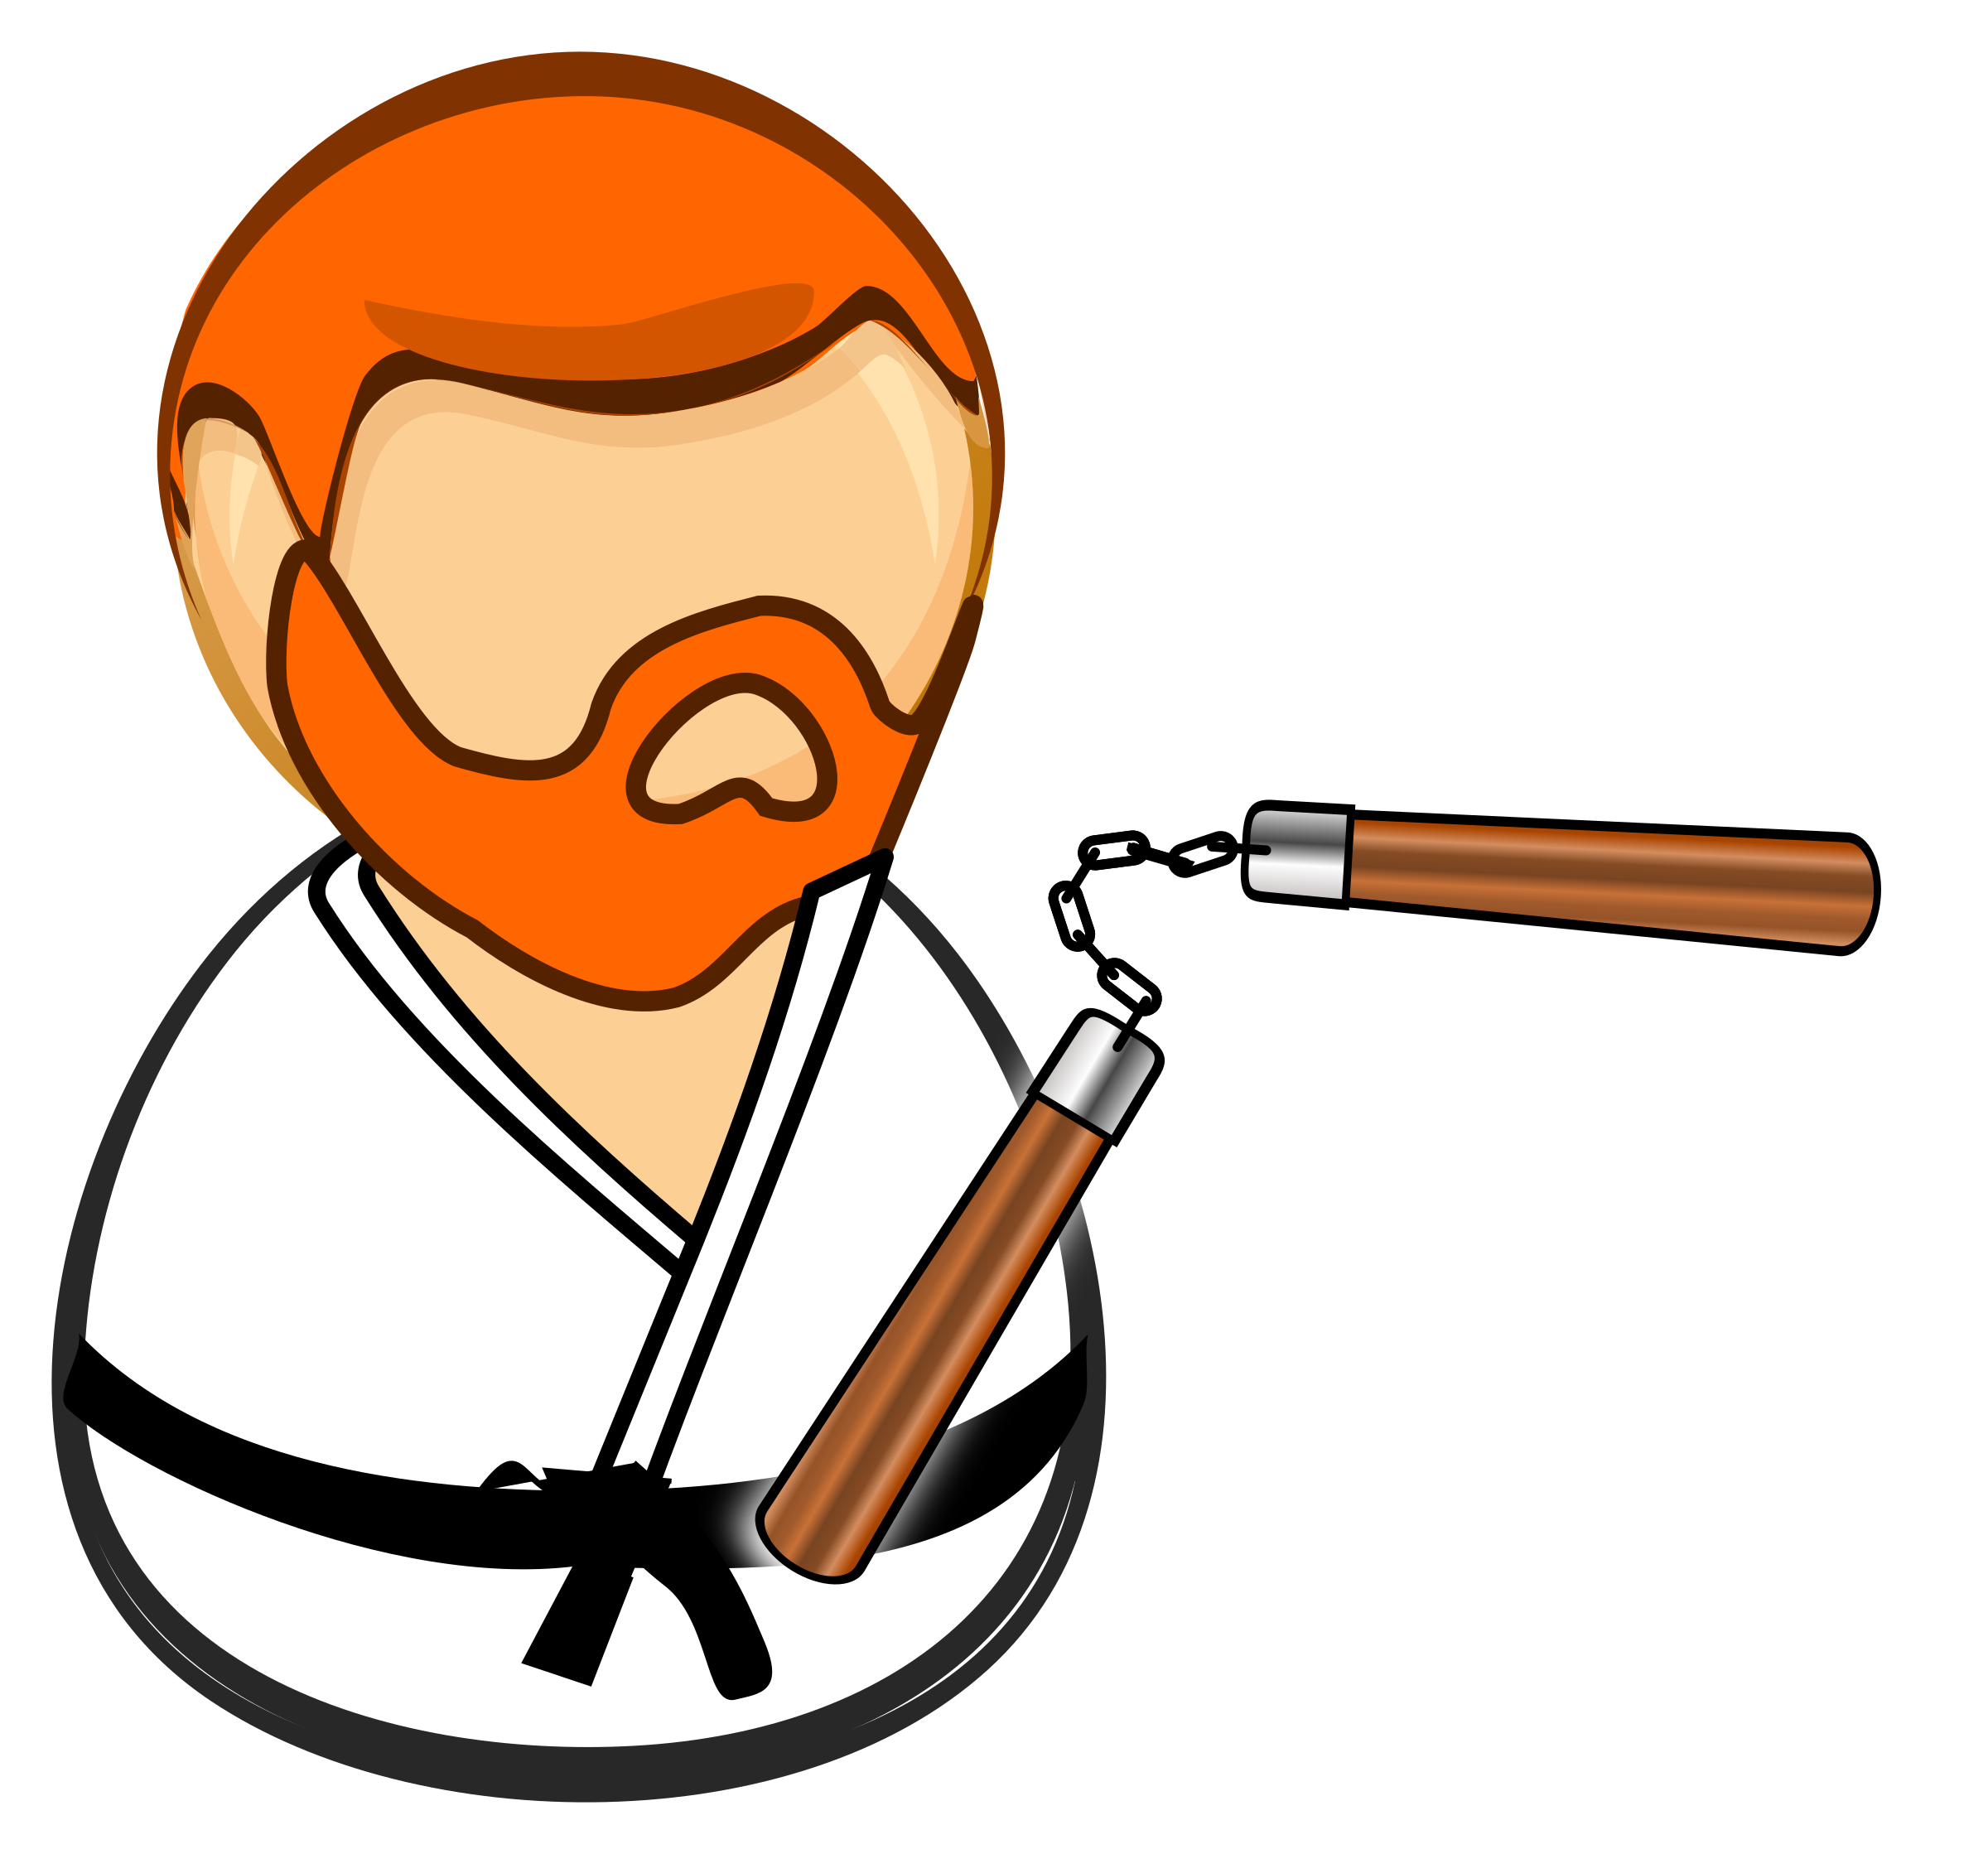 Pennant clipart cartoon. Nunchuck norris icons png